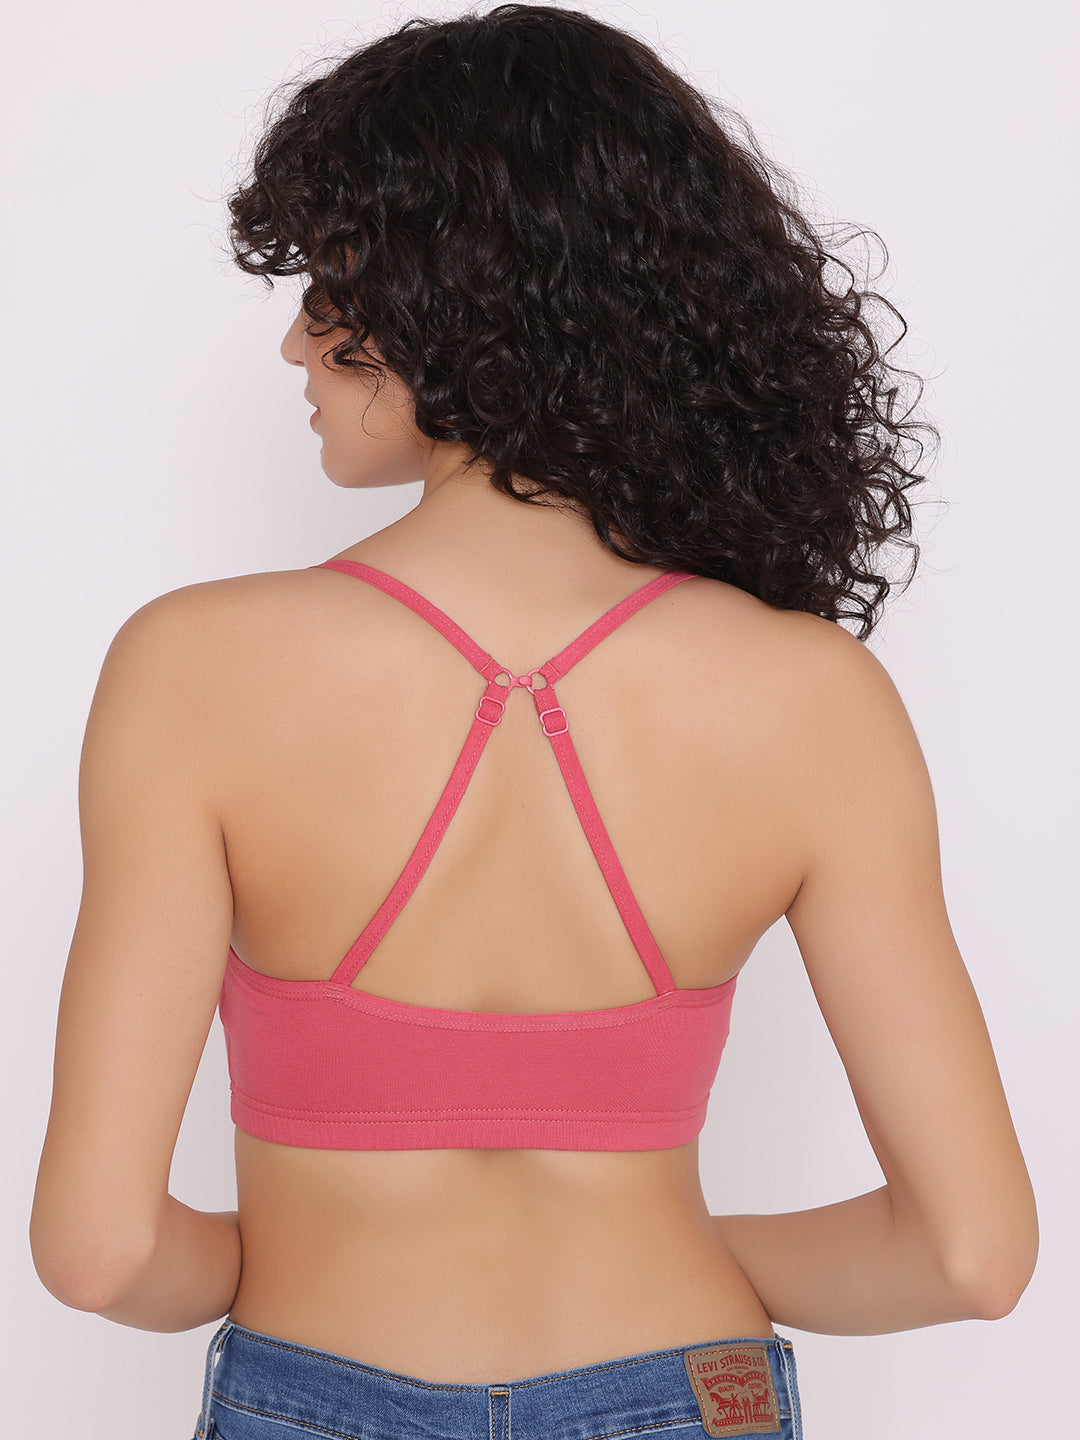 Buy online Contrast Binding Sports Bra from lingerie for Women by Sonari  for ₹399 at 24% off